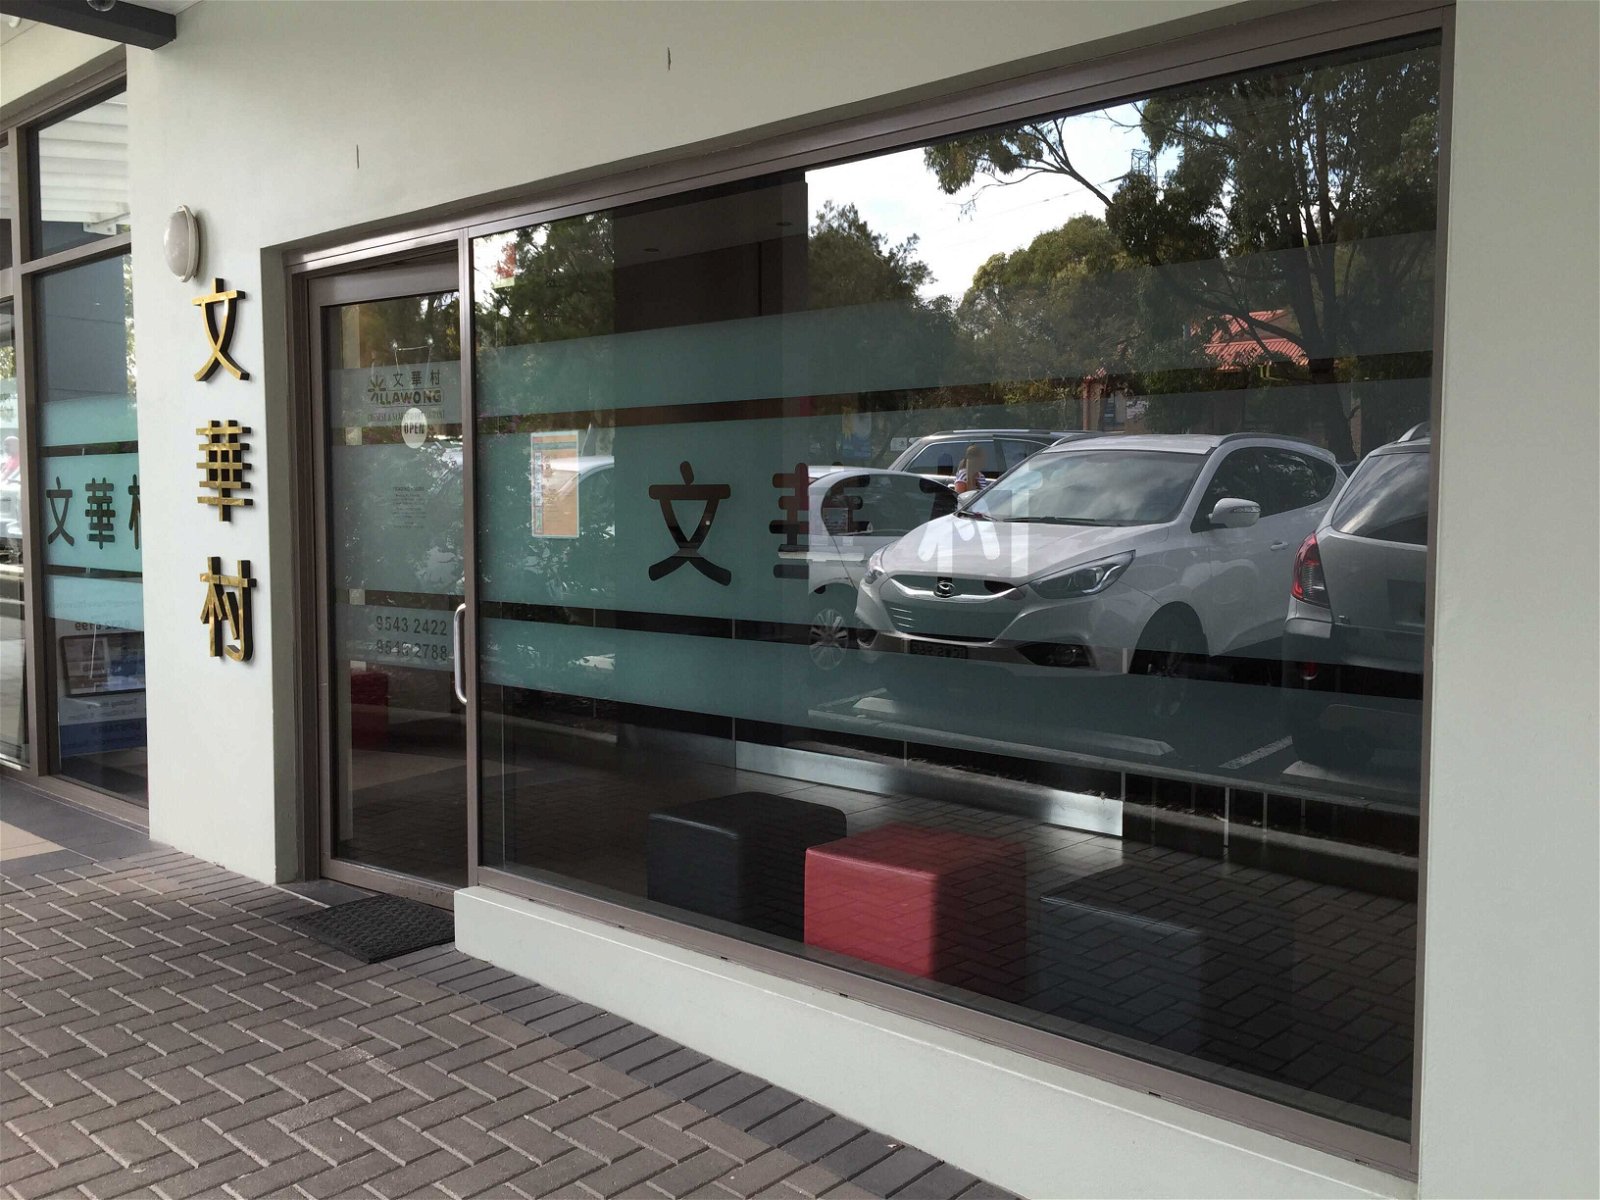 Illawong Chinese & Seafood Restaurant - Accommodation Bookings 0